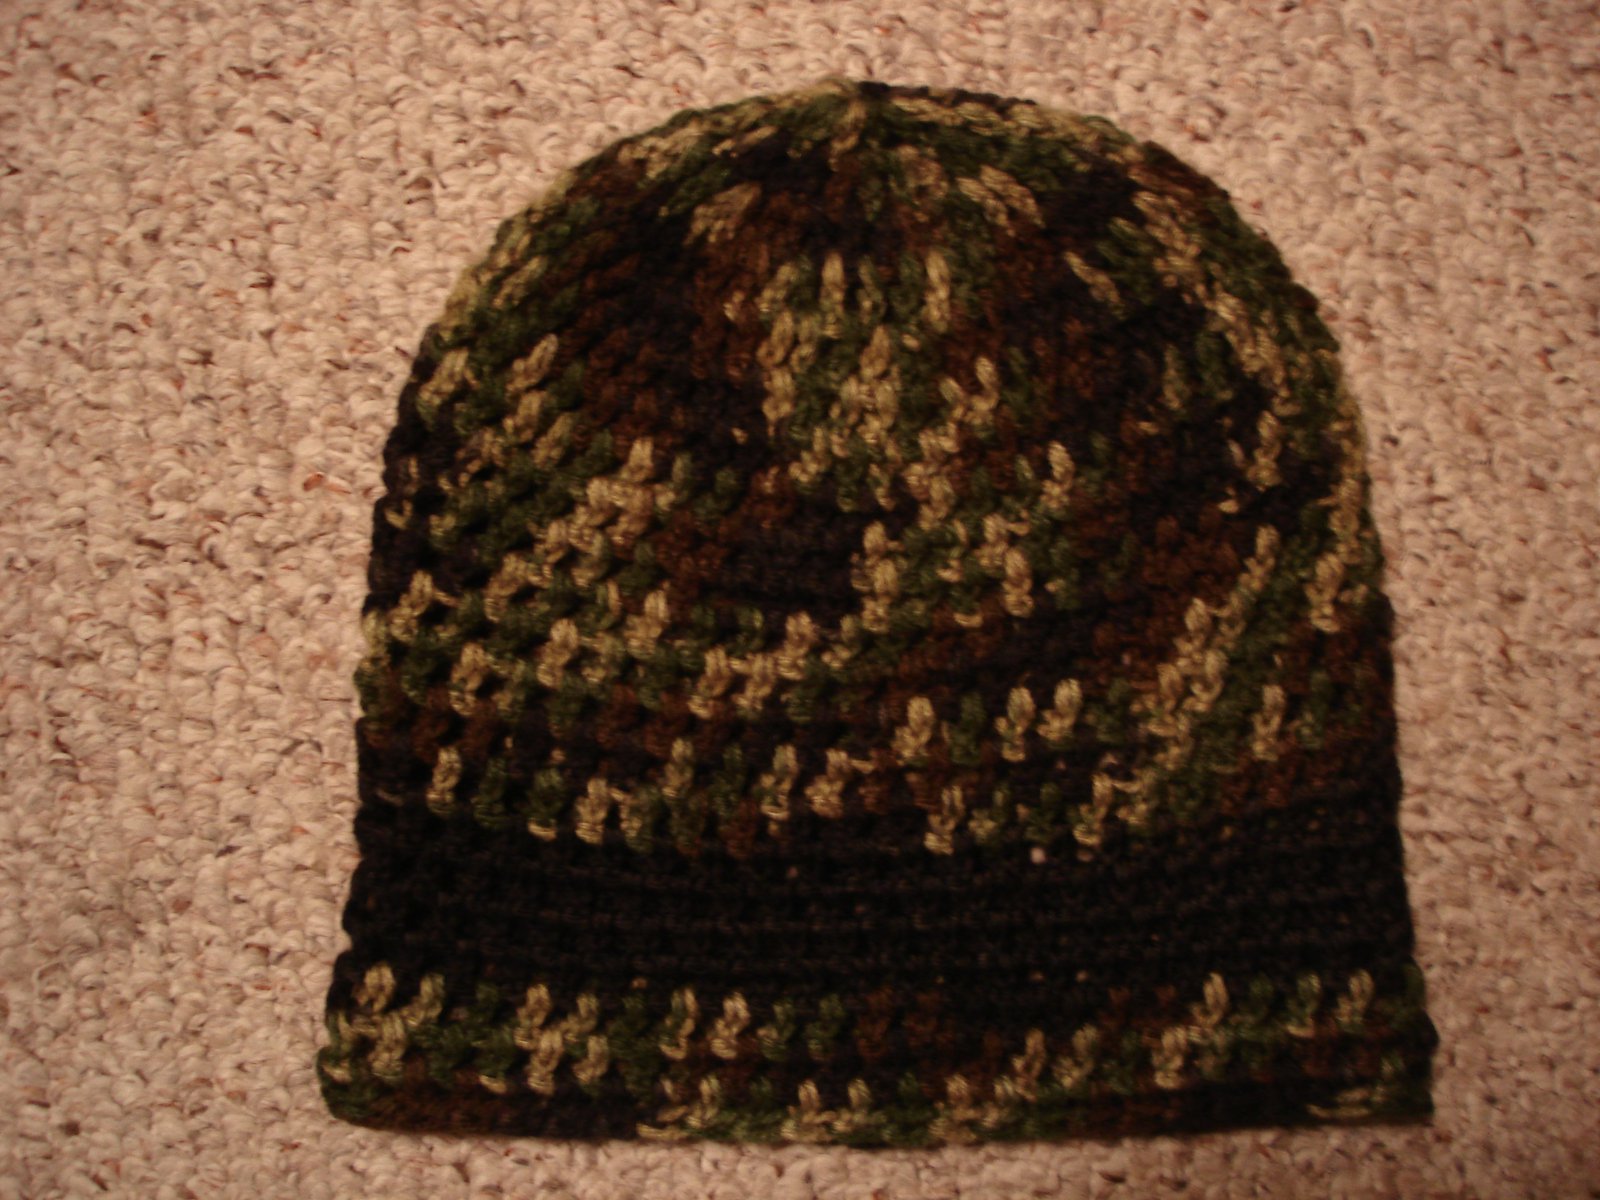 Another hat